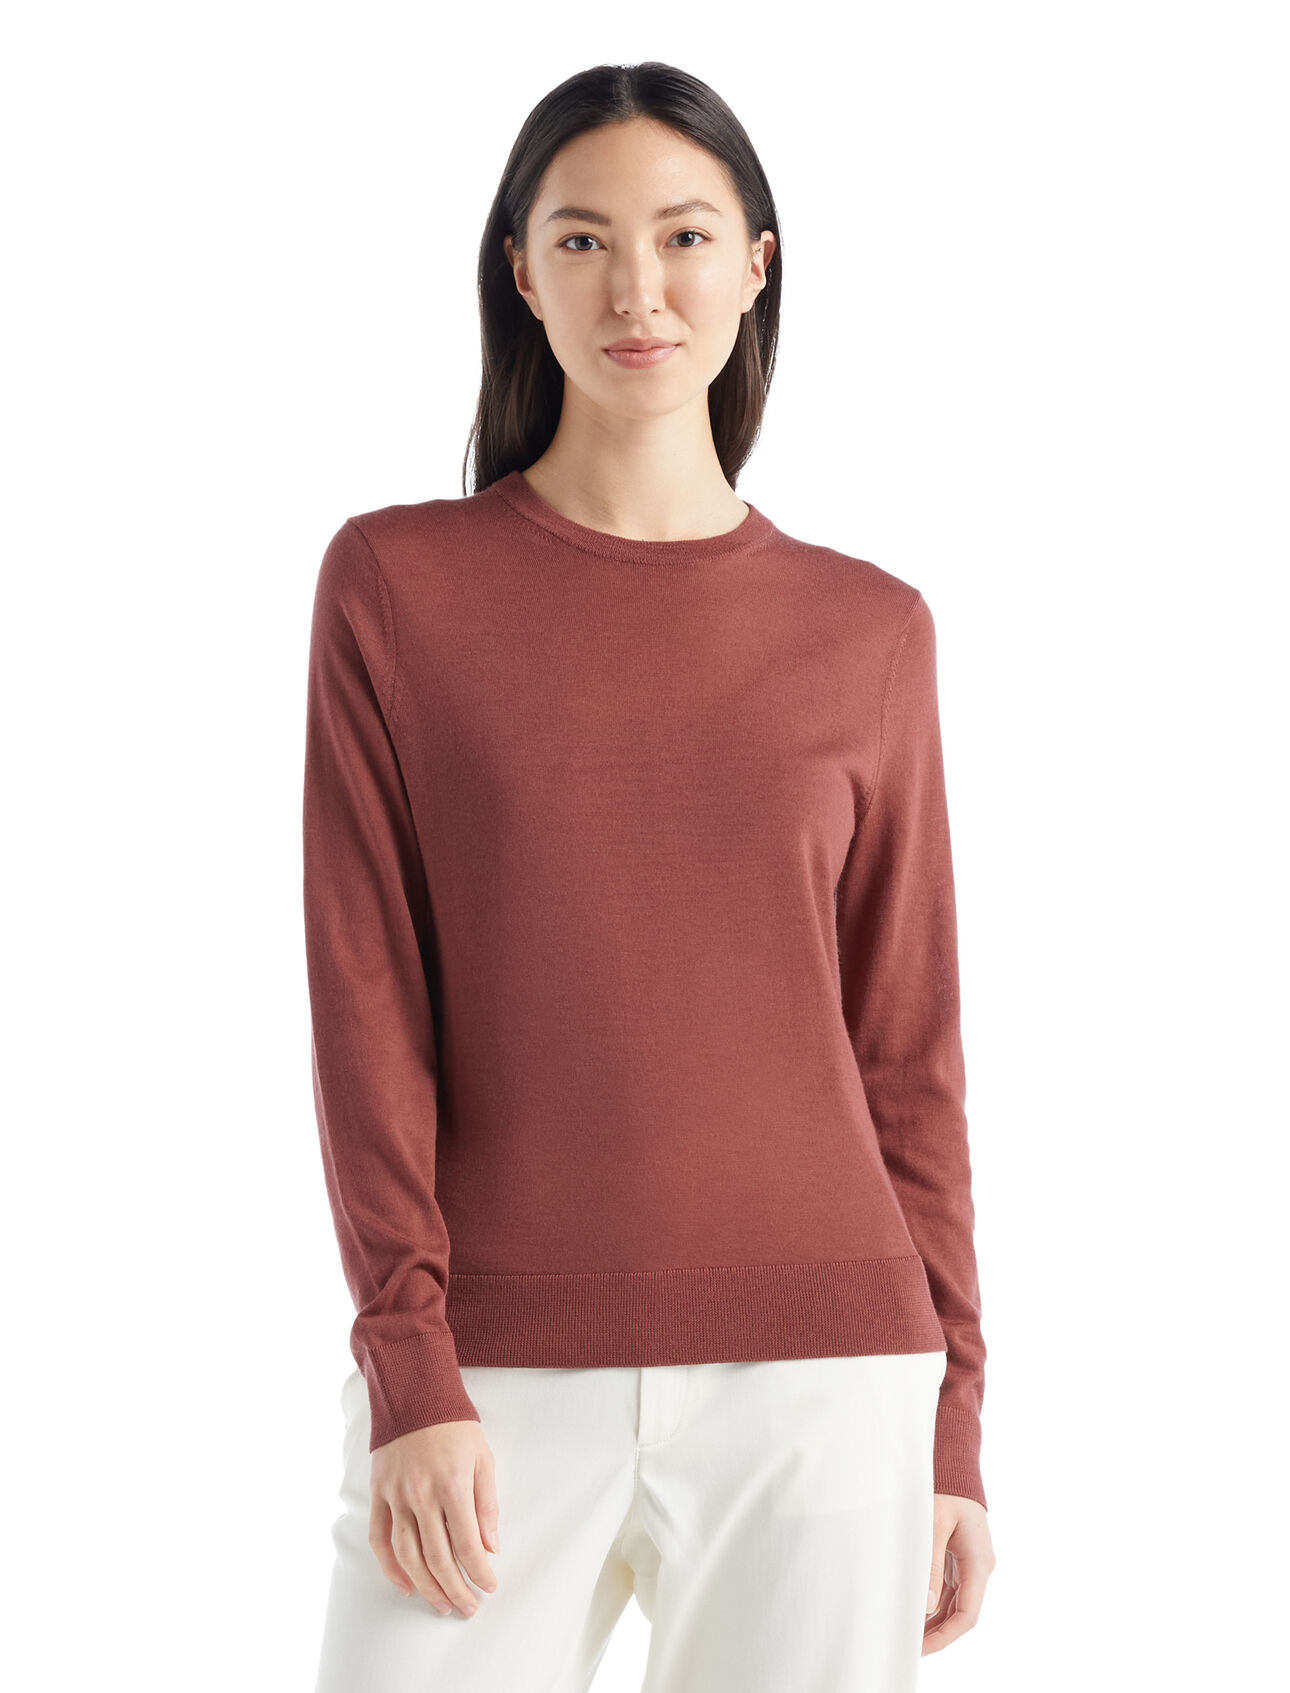 Womens Merino Wilcox Merino Long Sleeve Sweater  A classic everyday sweater made with ultra-fine gauge merino wool for unparalleled softness, the Wilcox Long Sleeve Sweater is perfect for days when you need a light extra layer.